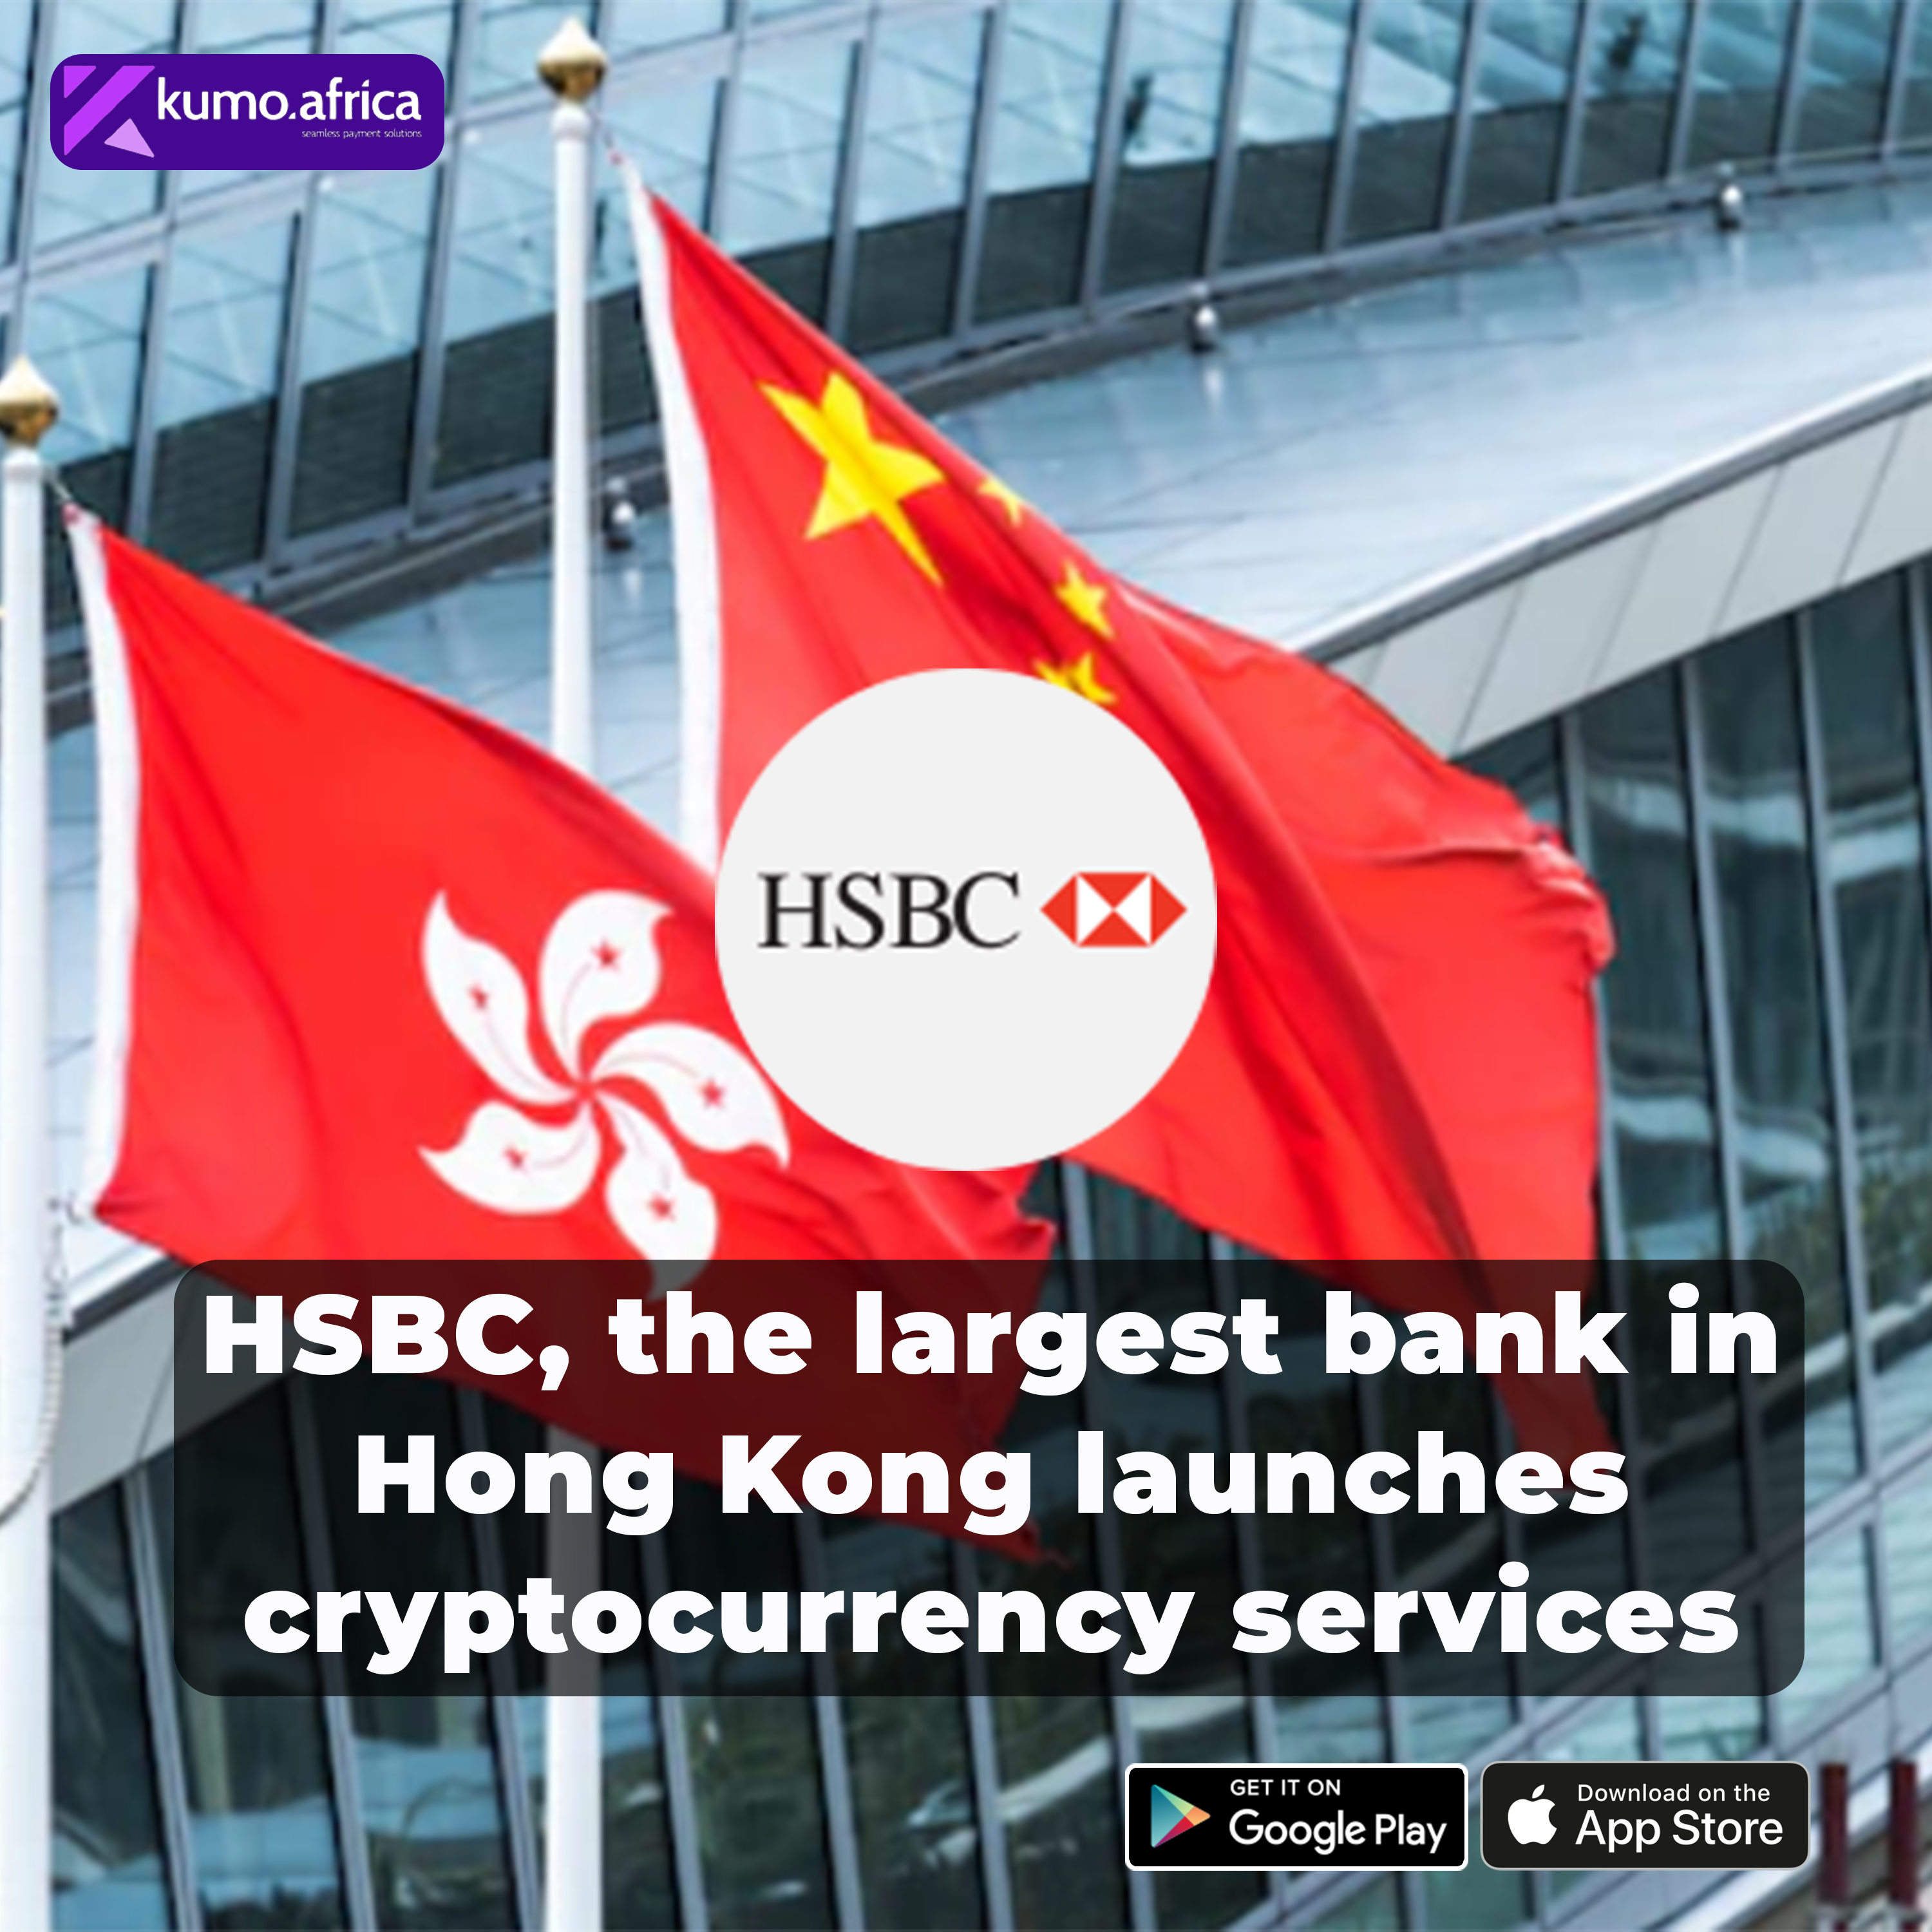 HSBC Cryptocurrency services